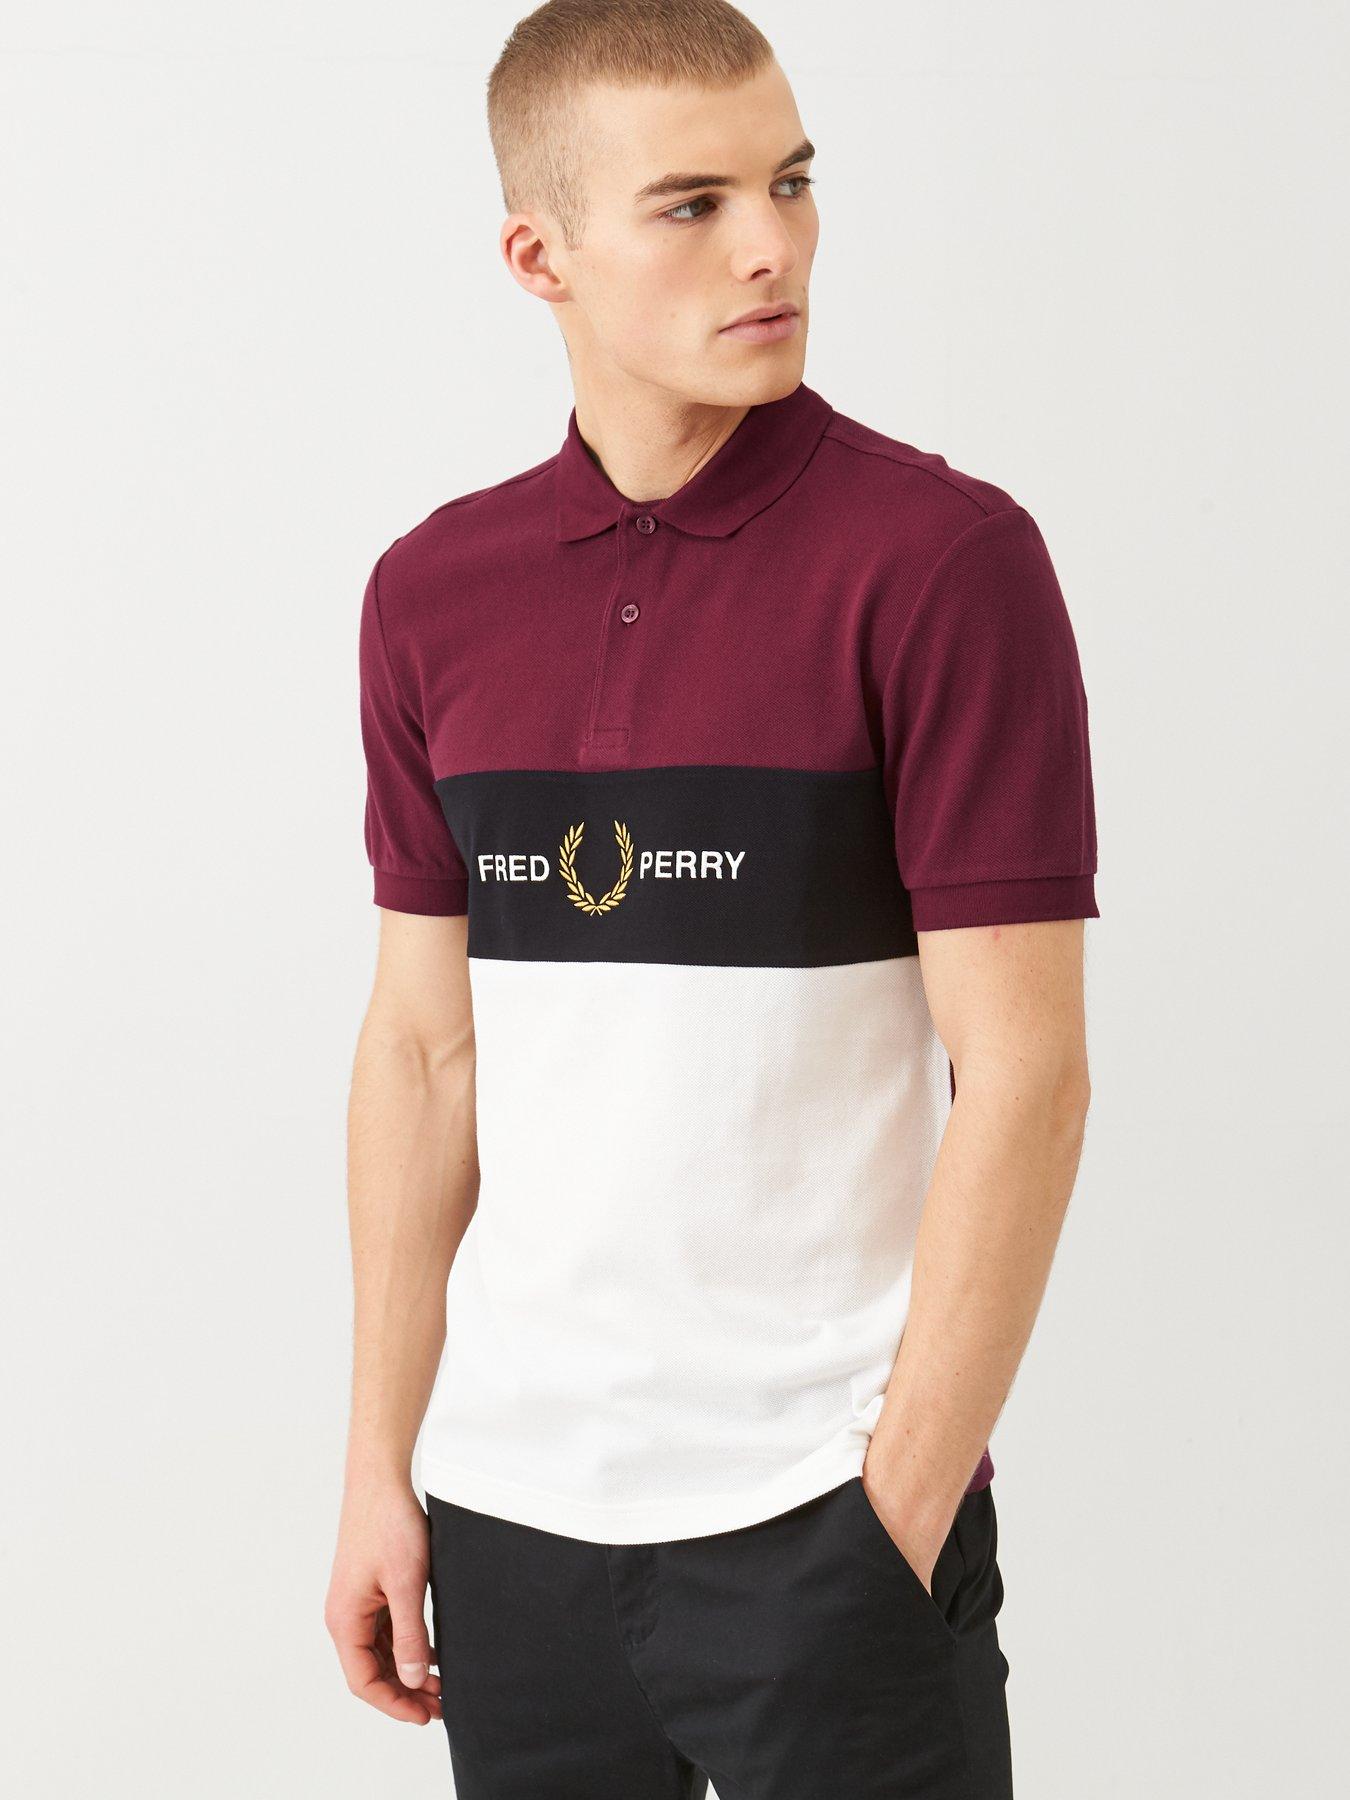 fred perry xxl sale